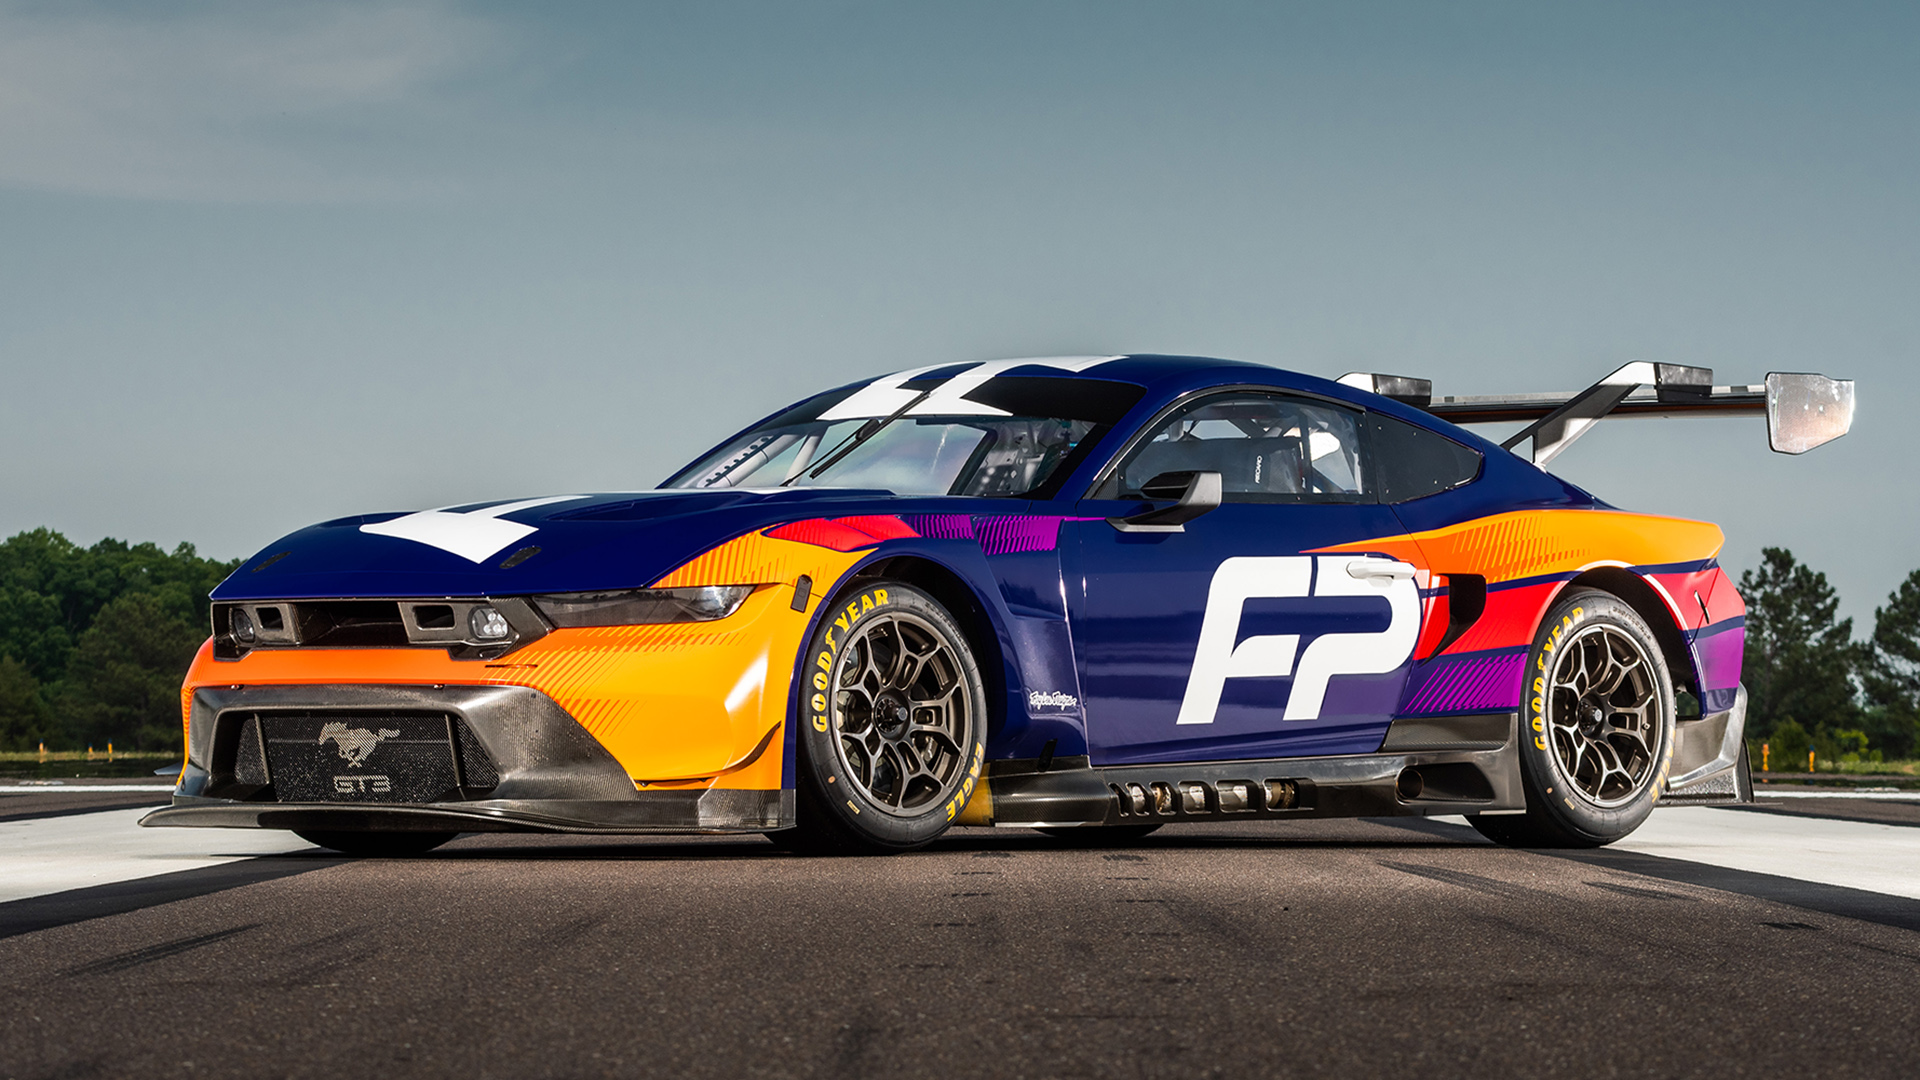 Ford Mustang GT3 Race Car Unveiled, Ready for Le Mans, IMSA, and WEC in